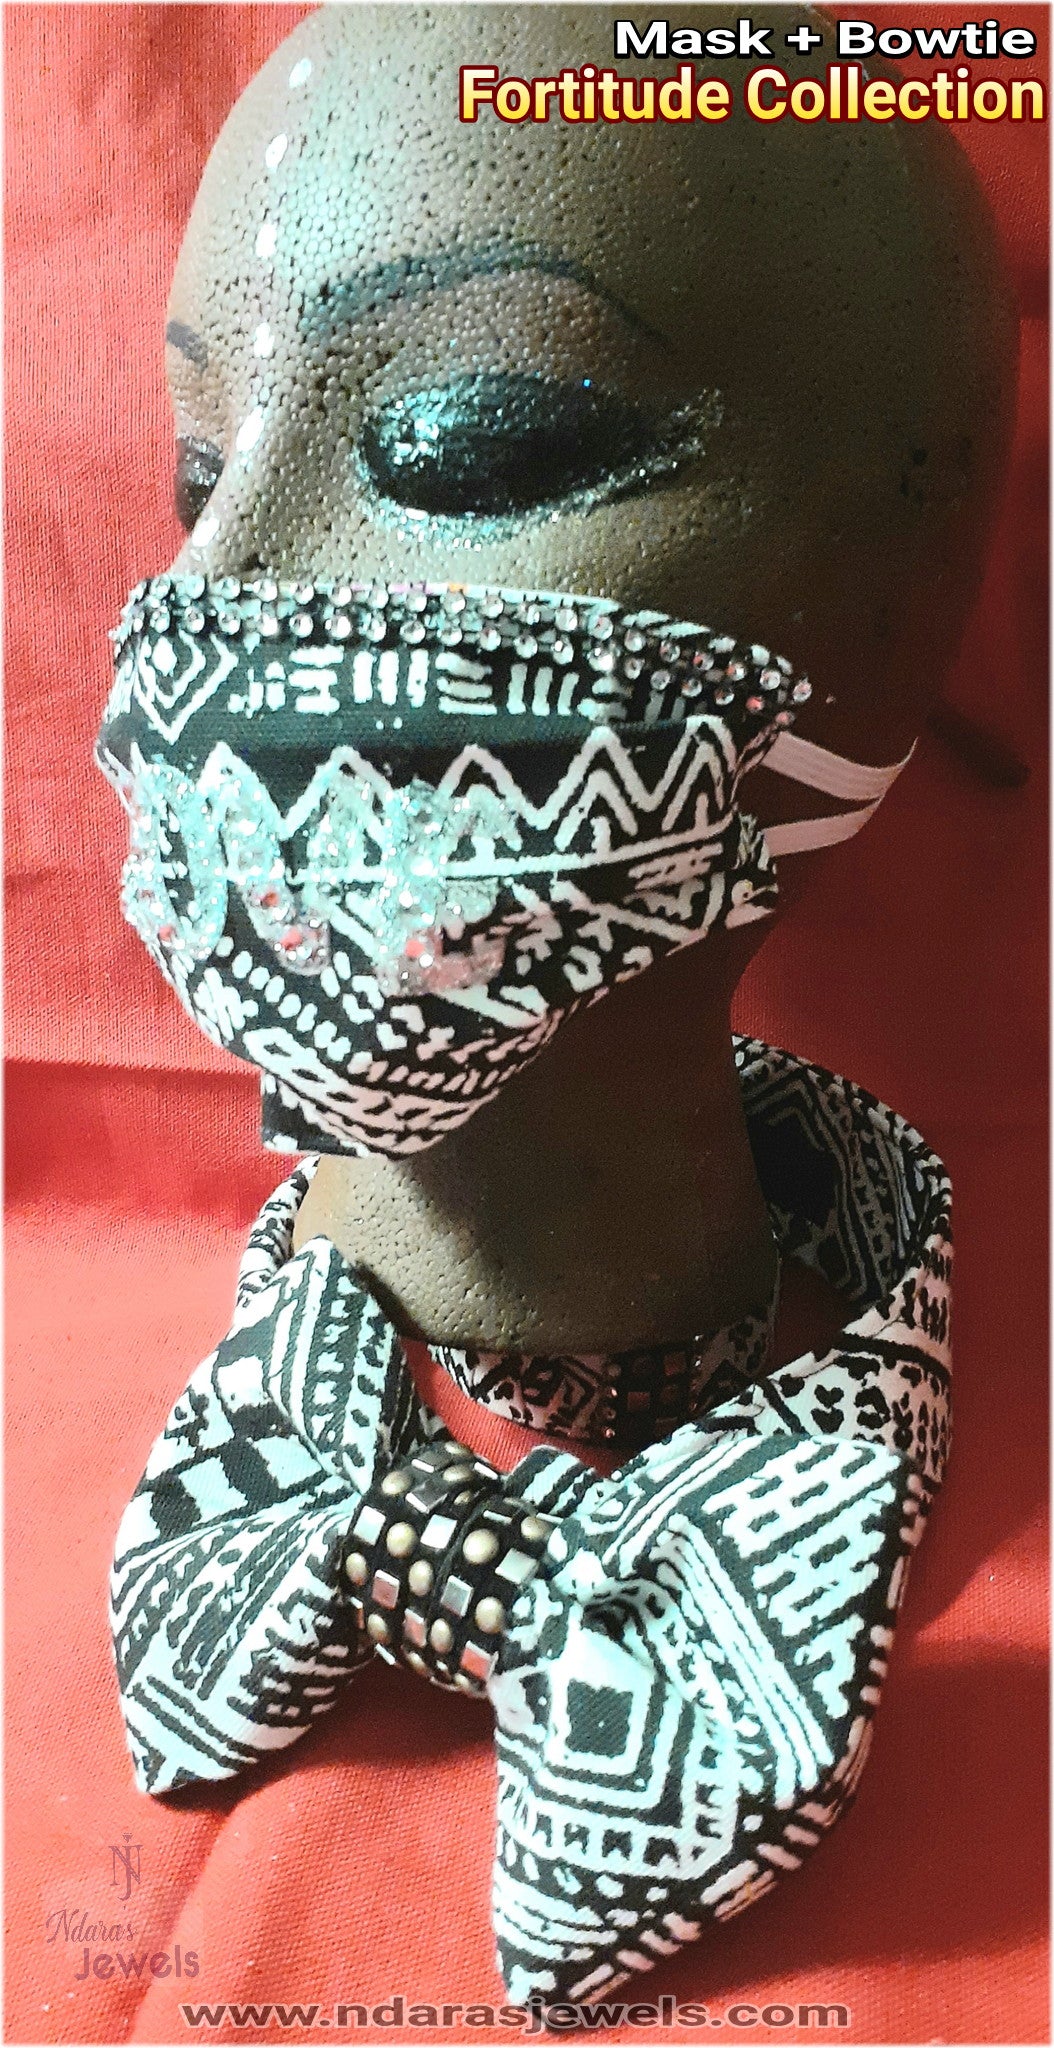 Fortitude Collection Mask + Bowtie Set-Ndara's Jewels